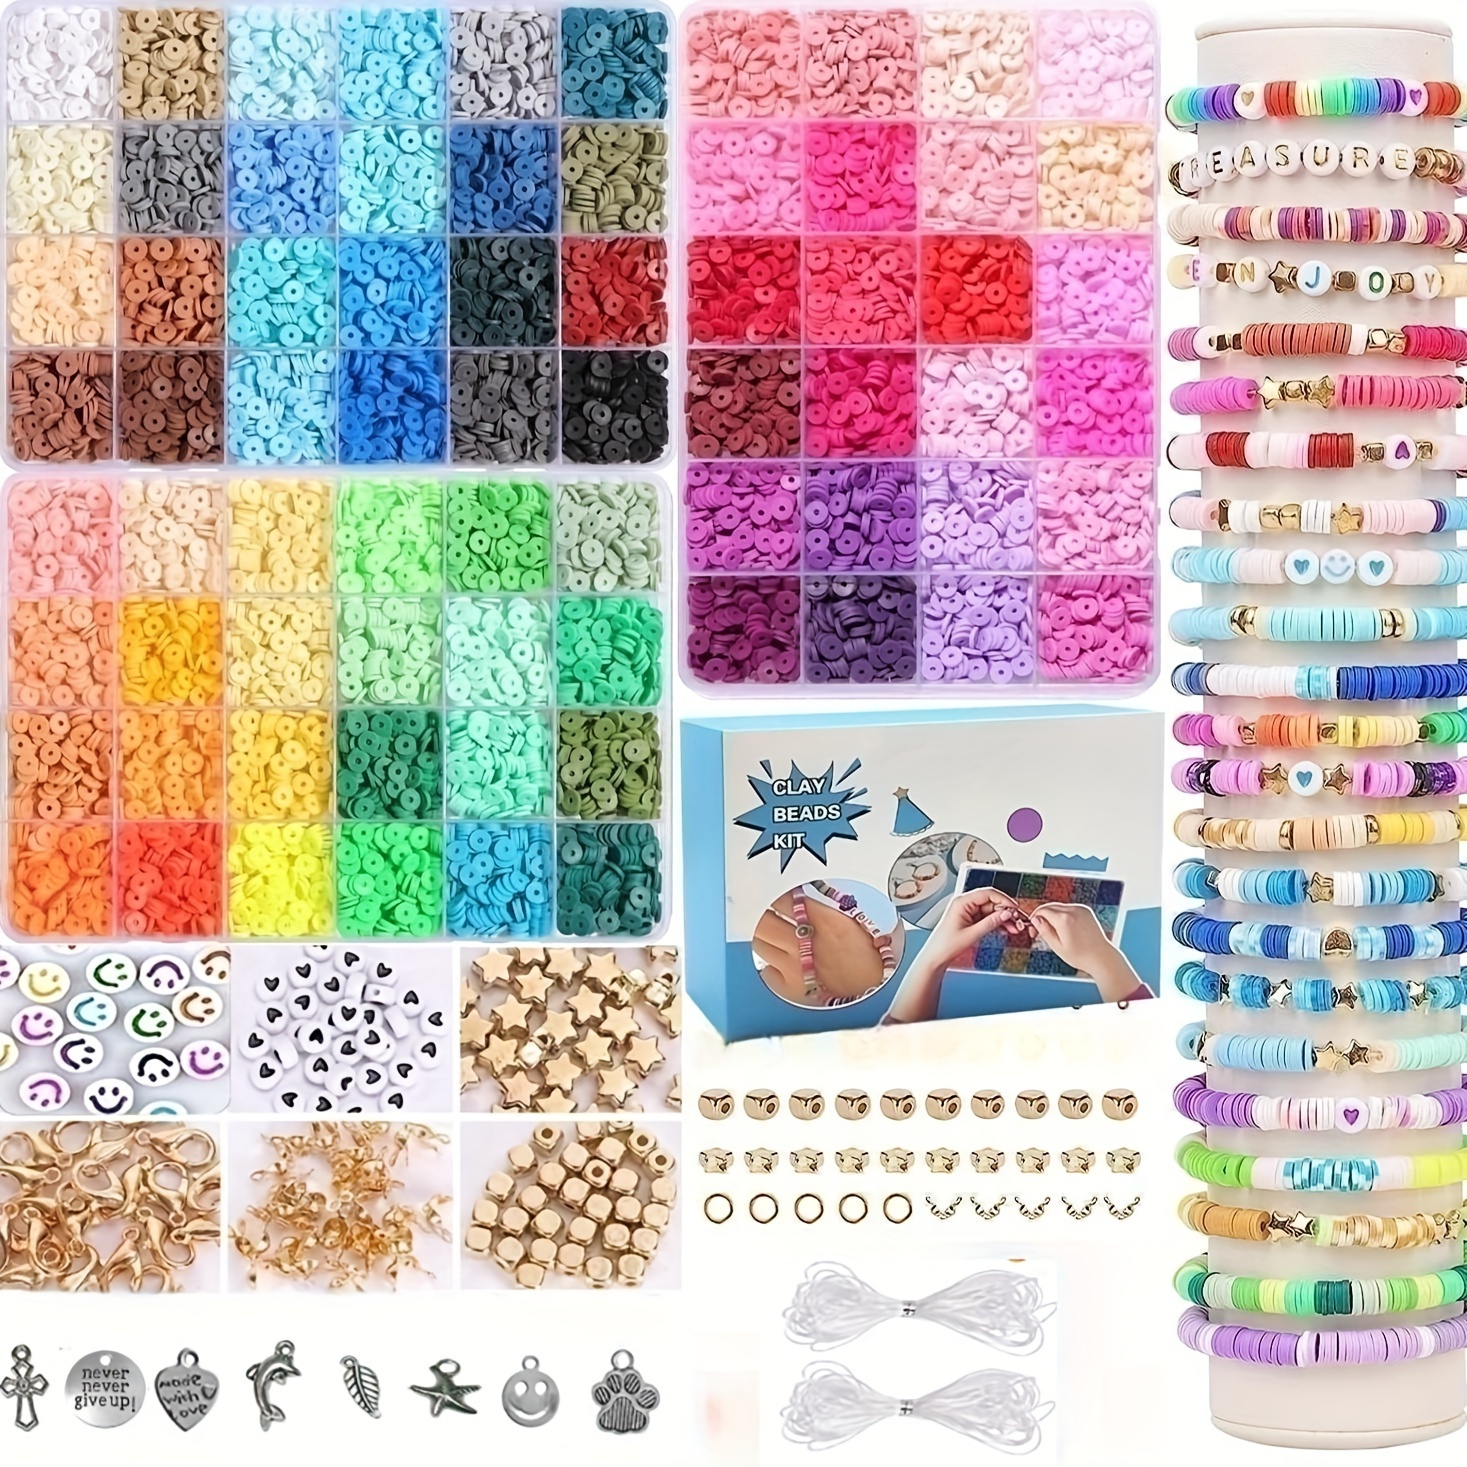 Clay Beads Kit, Jewelry Accessories, Colorful Preppy & Necklace Kits,  Bracelet Making Kit for Charming Girls, 4200Pcs Clay Beads Kit with Round